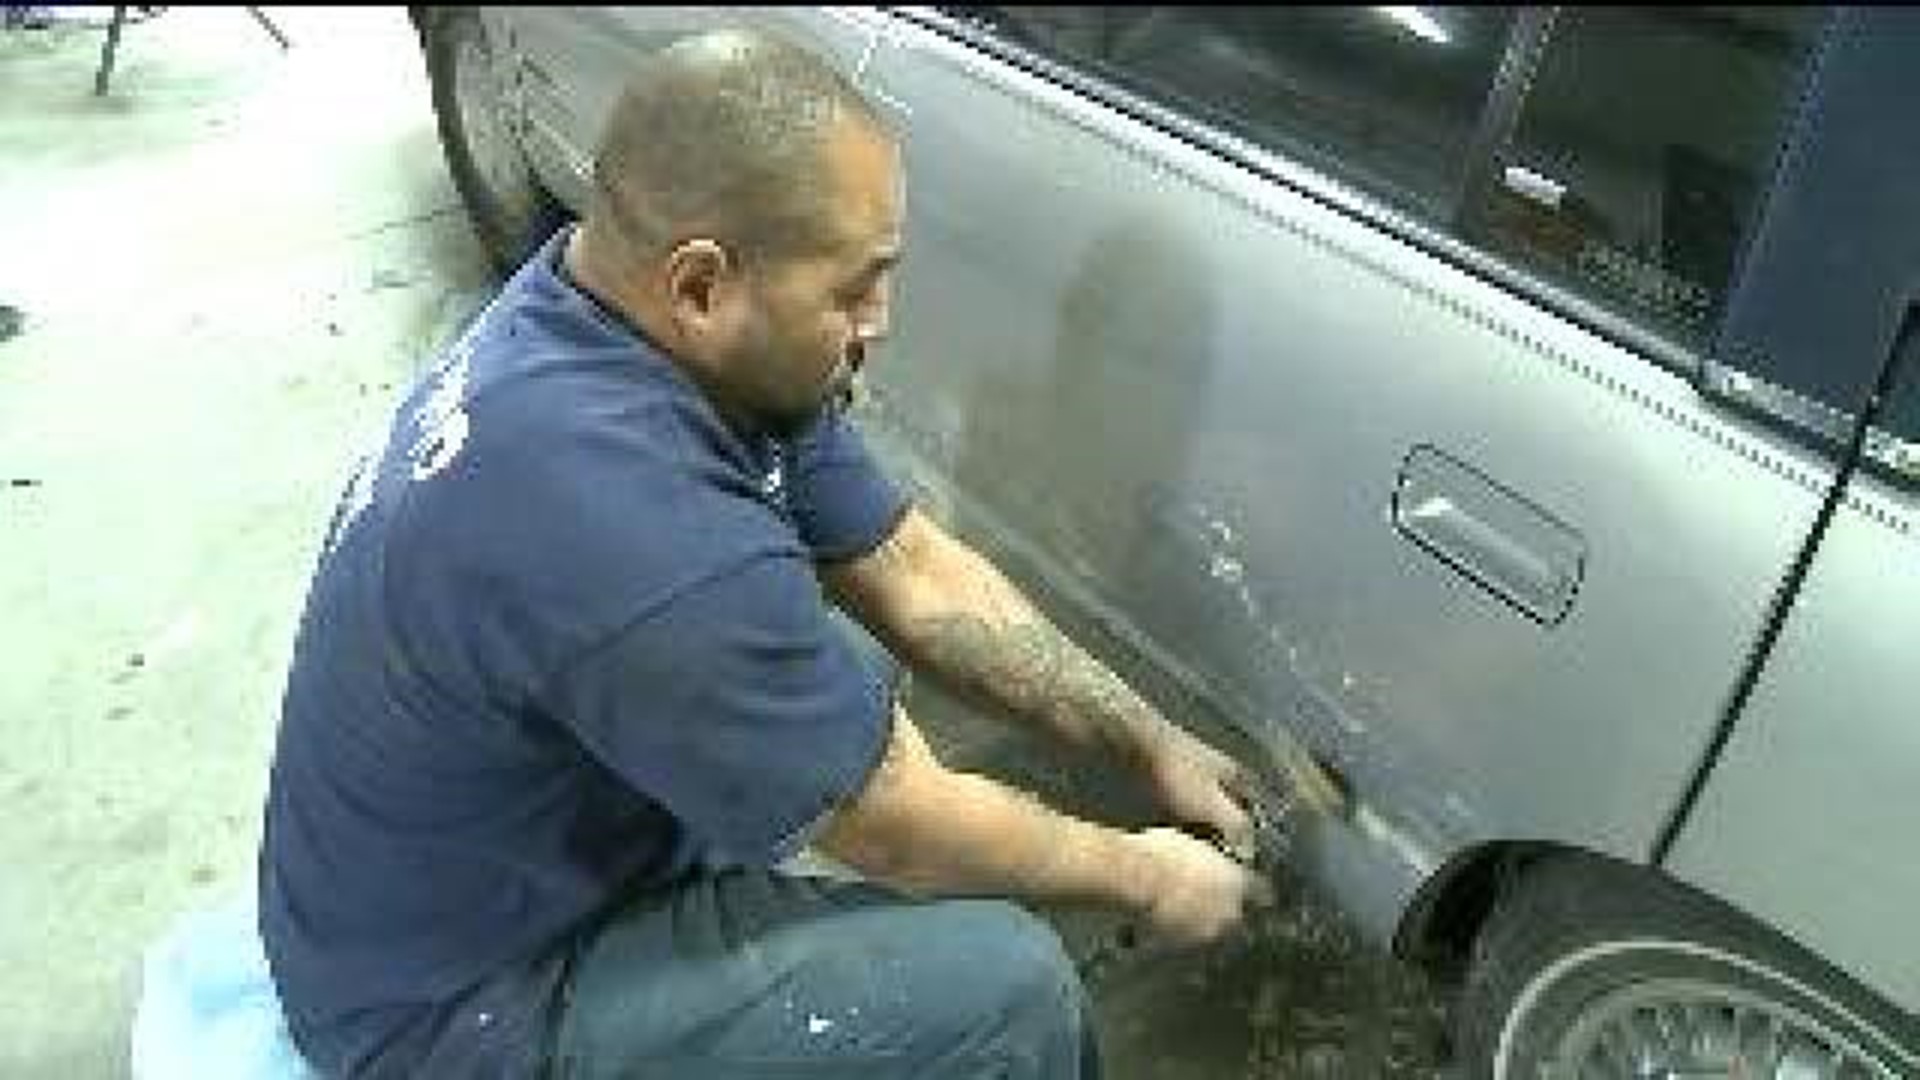 Winter Weather Gives Boost to Body Shops